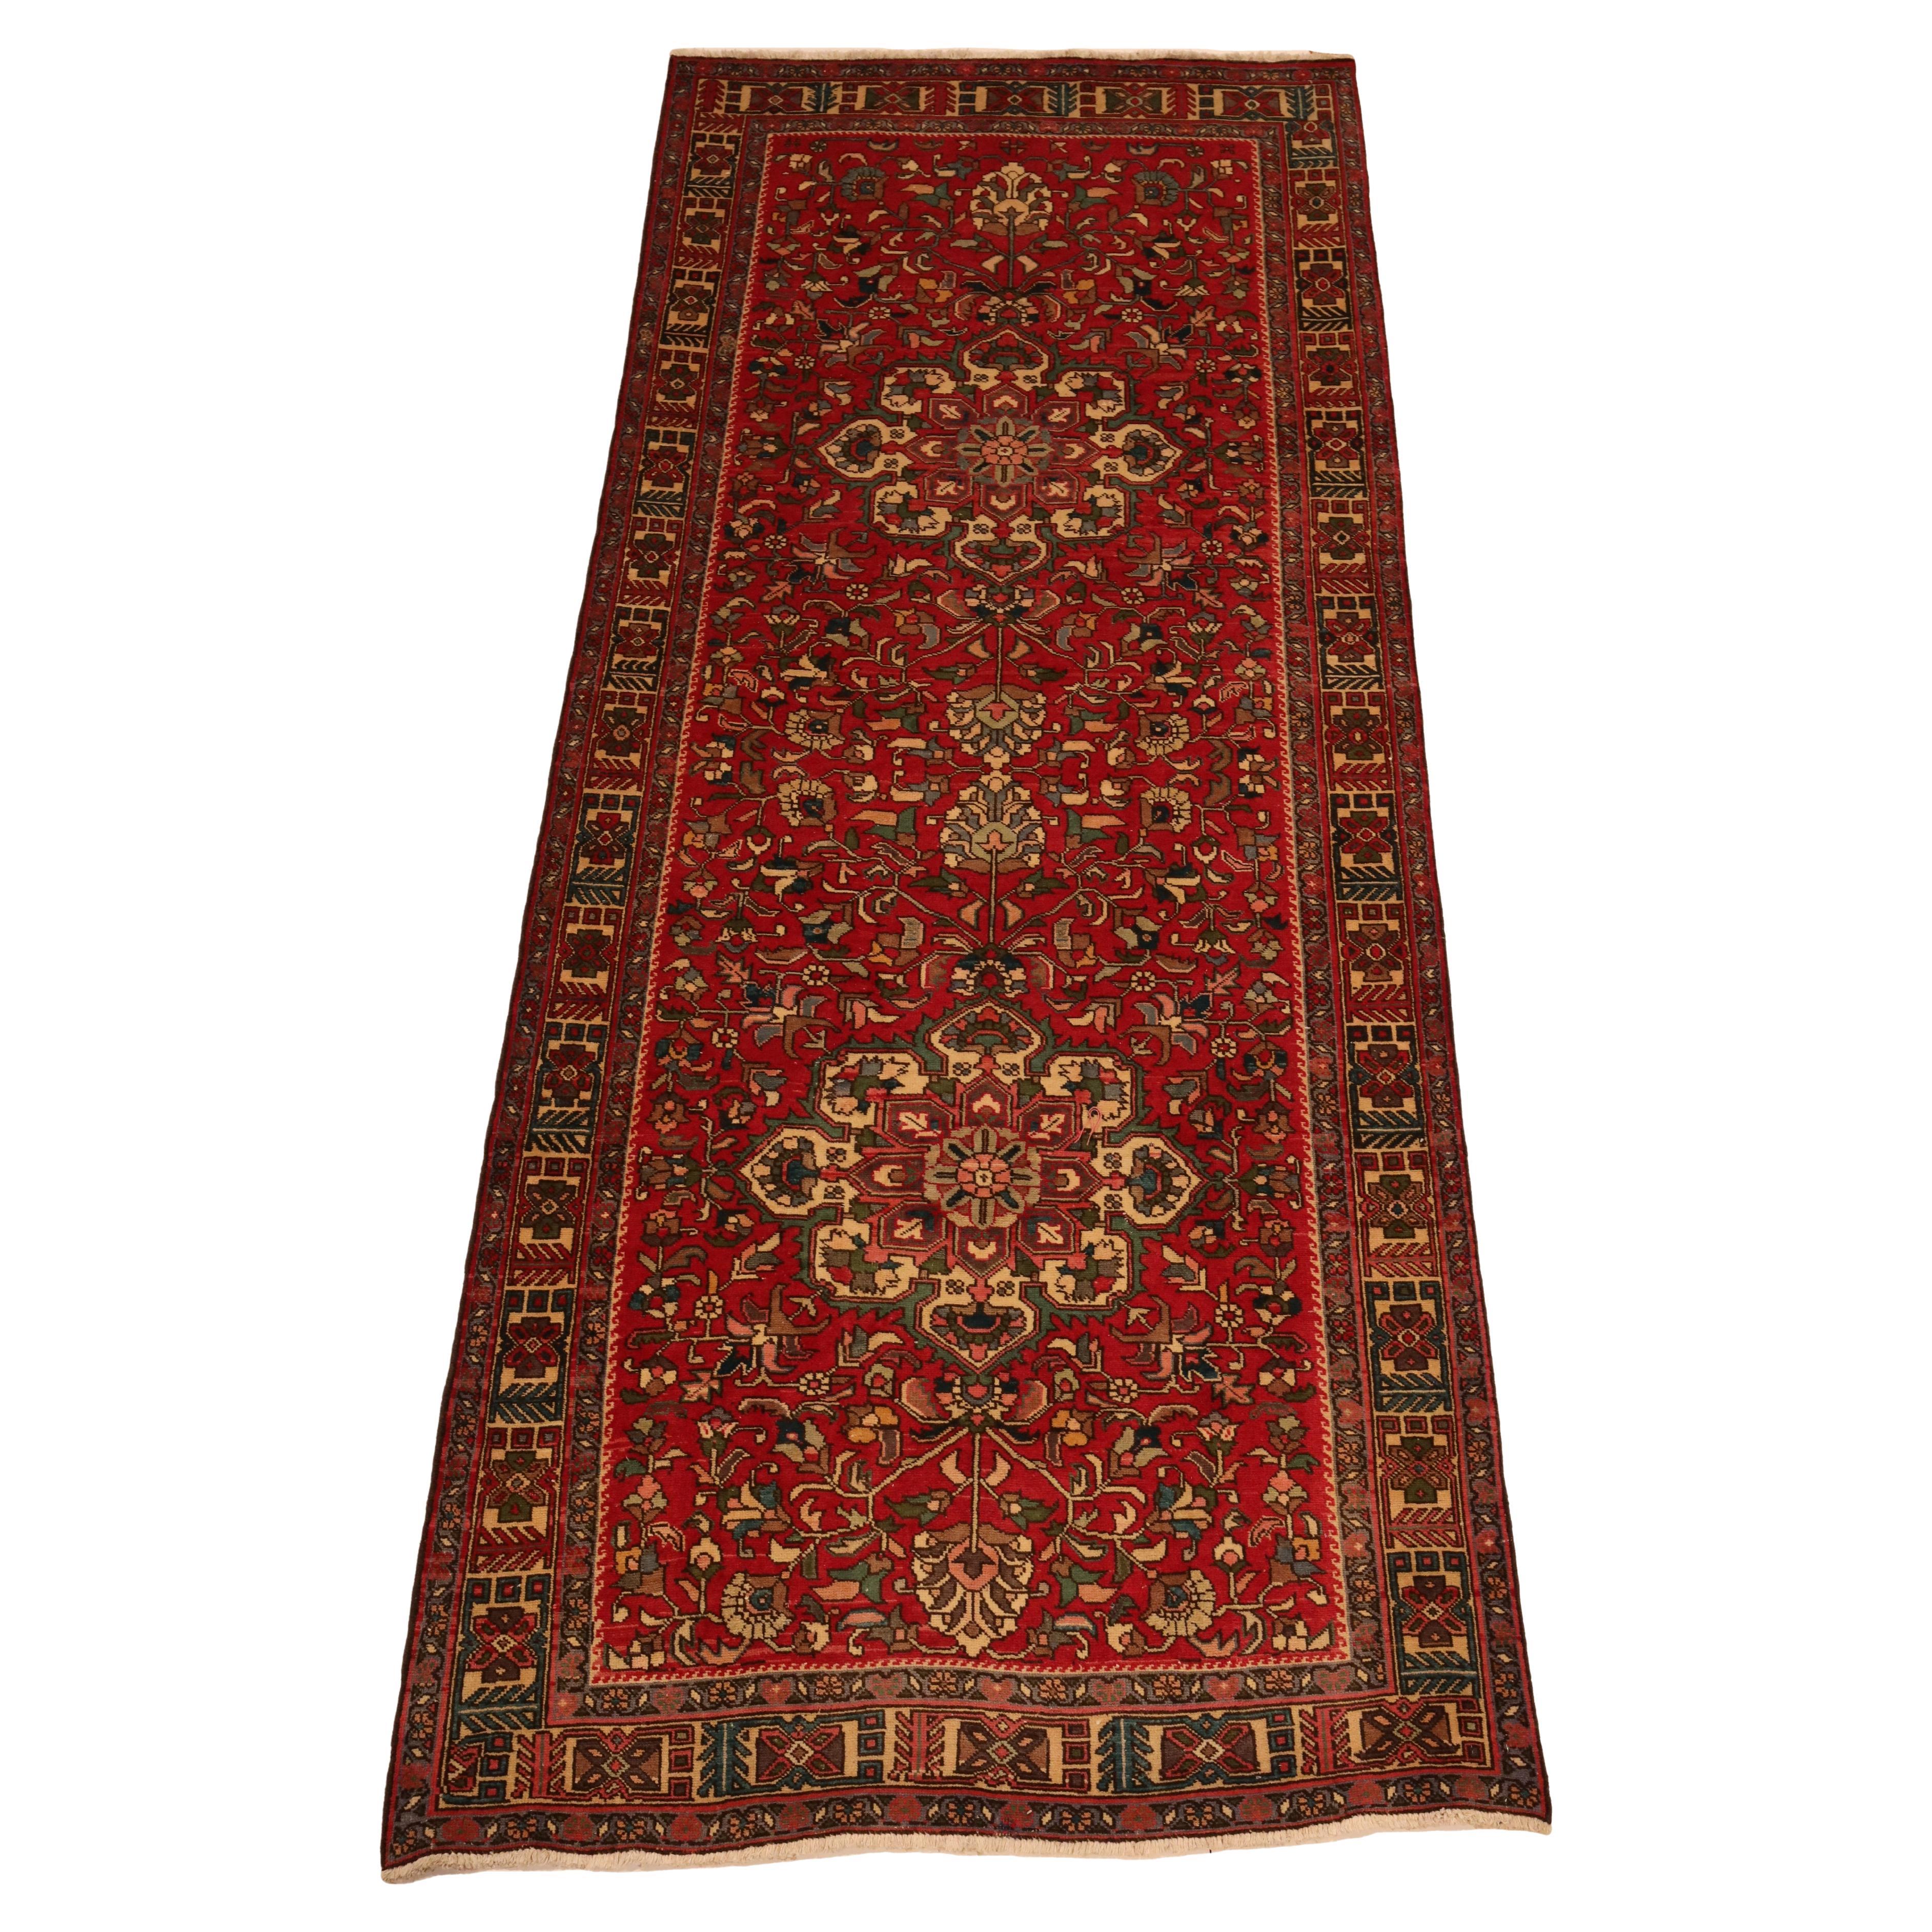 North-West Persian Semi-Antique Runner - 4'10" x 11'11" For Sale